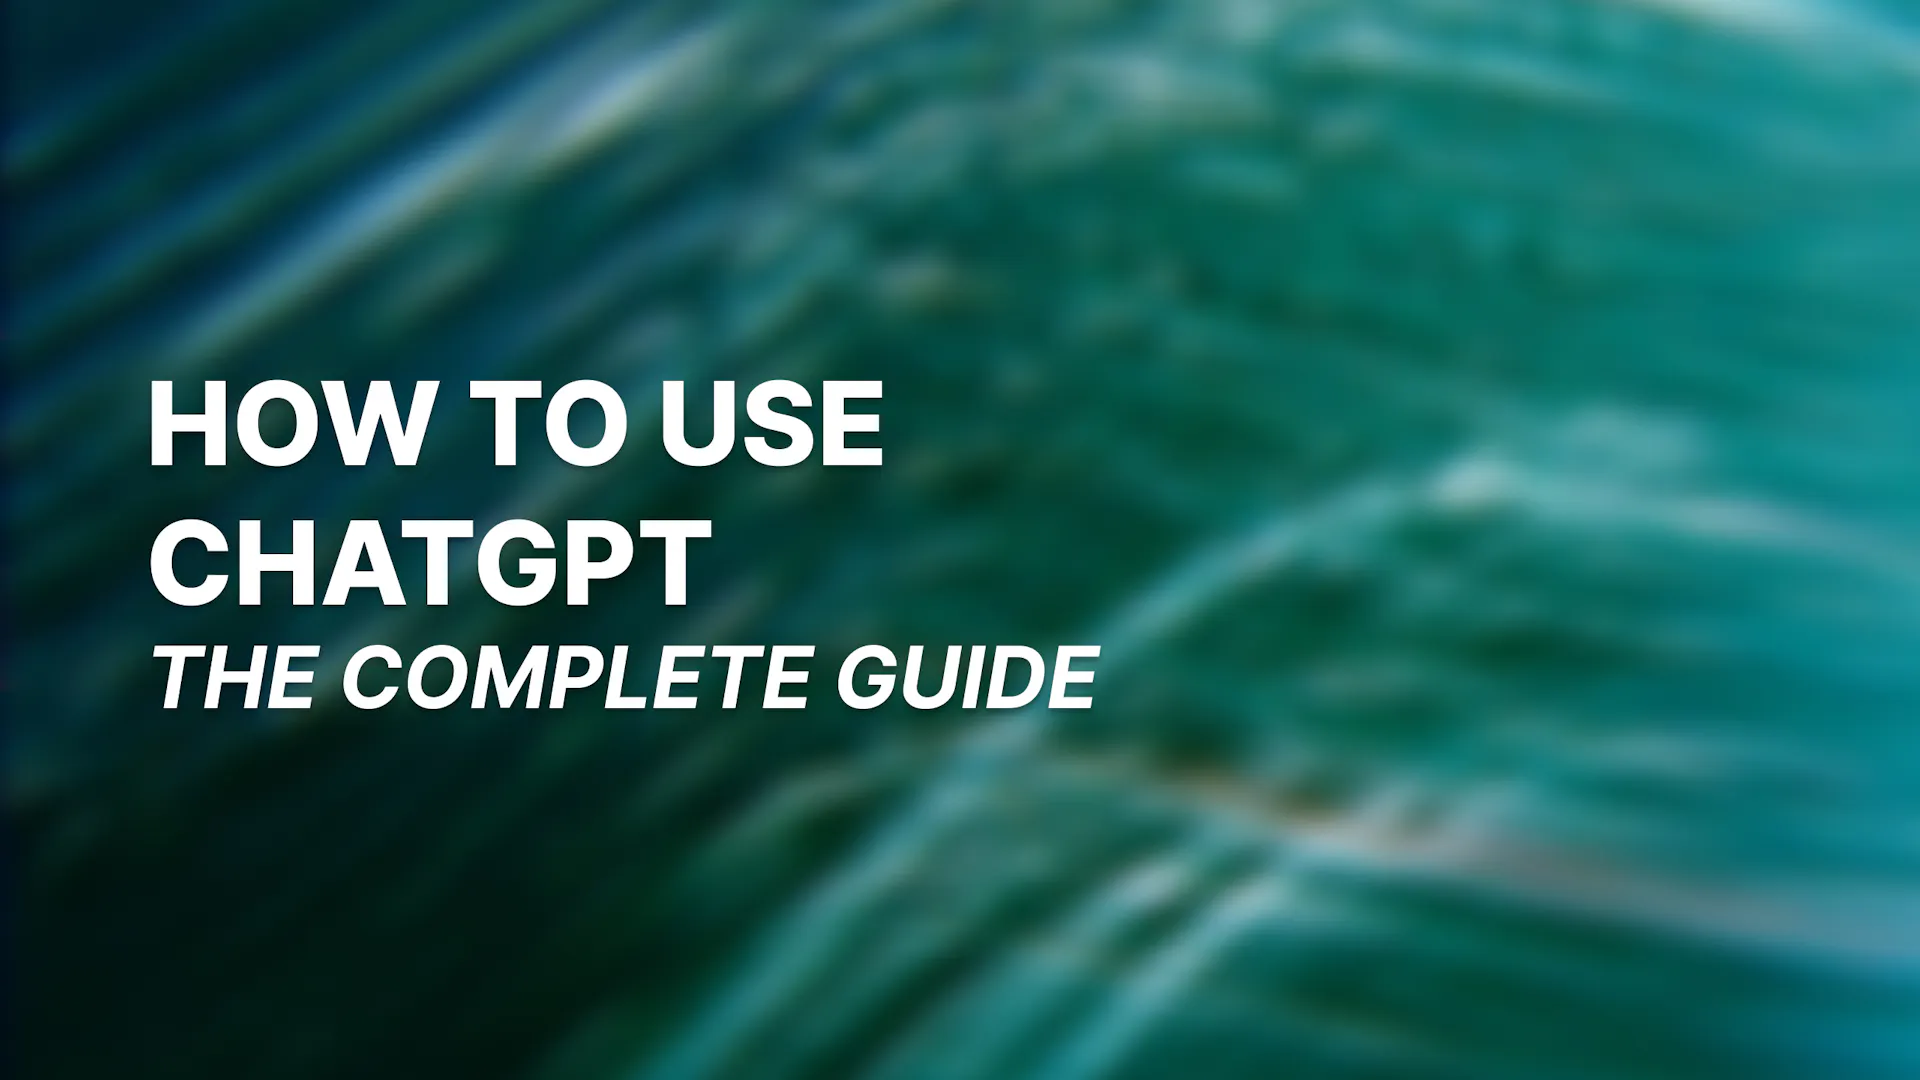 How to Use ChatGPT: The Complete Guide